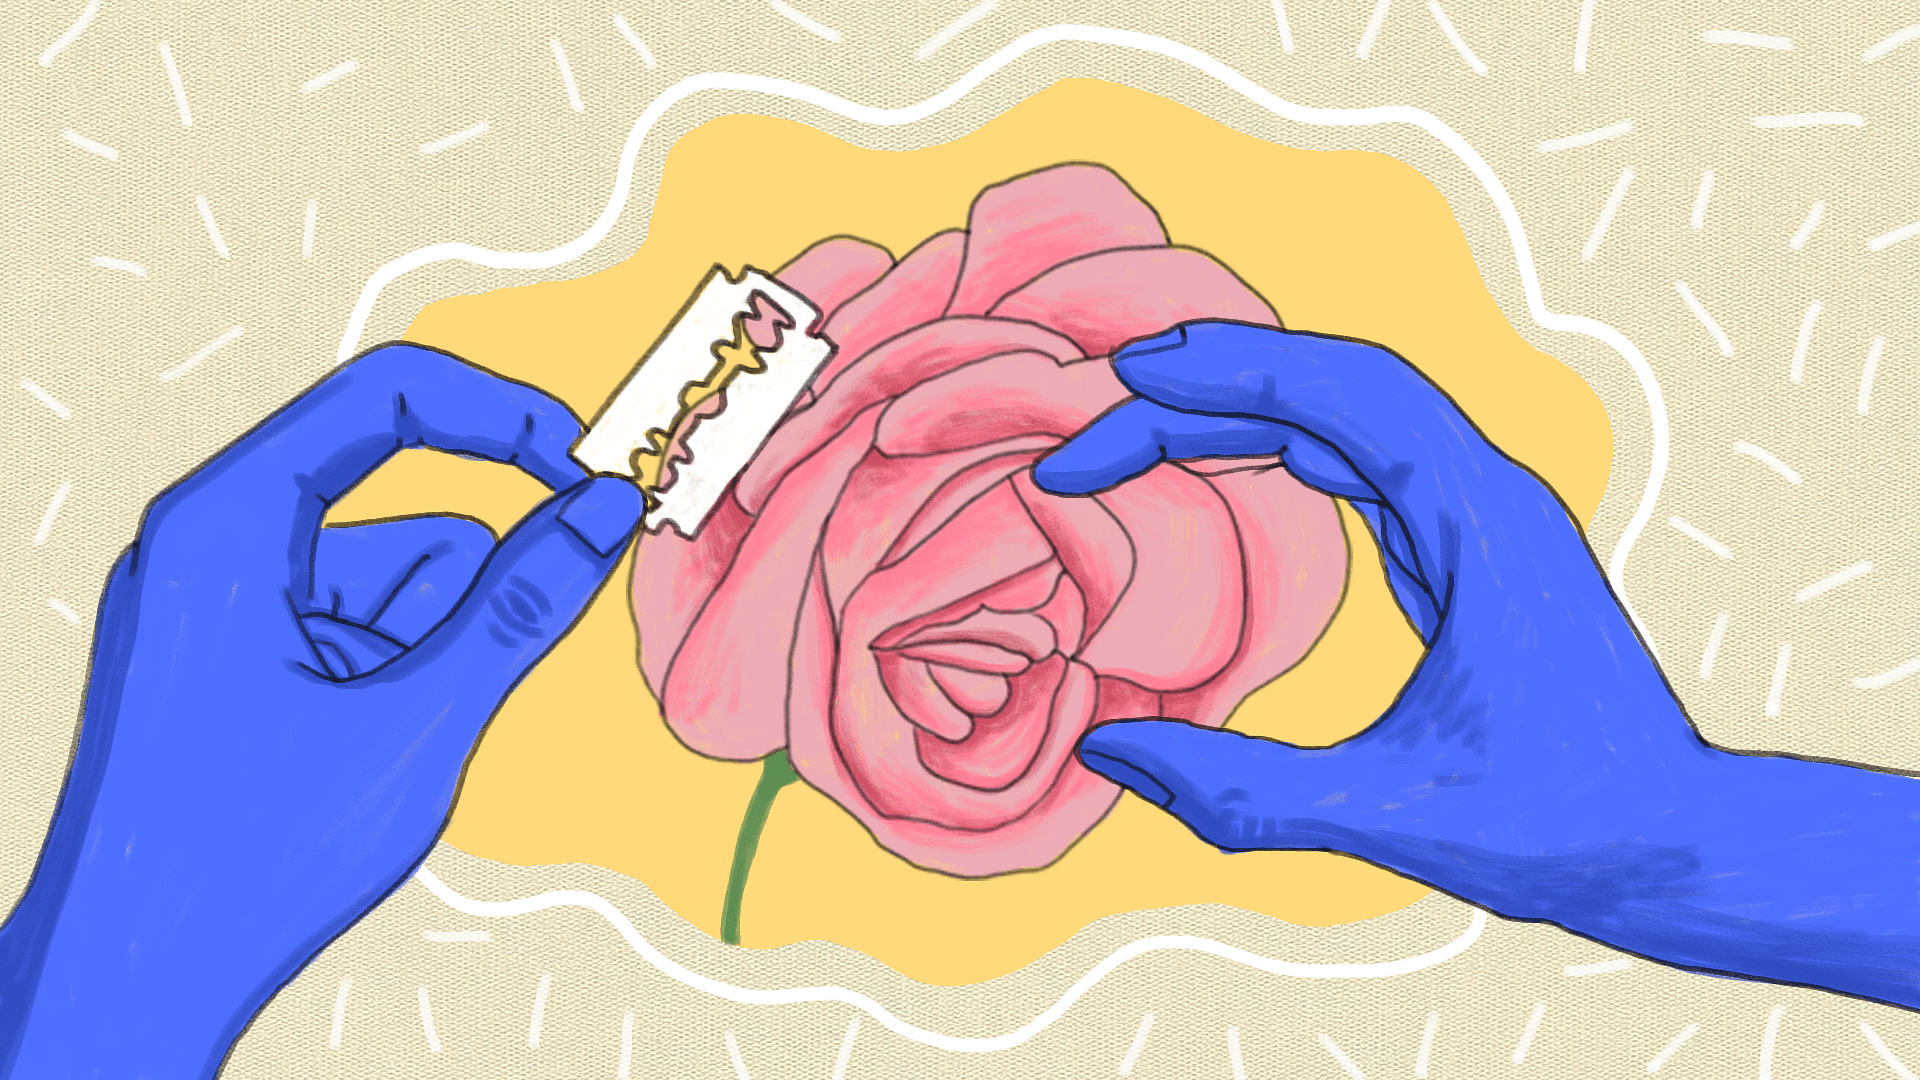 A separate law to curb FGM would be best under the circumstances, says a new report.(Illustration: Susnata Paul/<b>The Quint</b>)